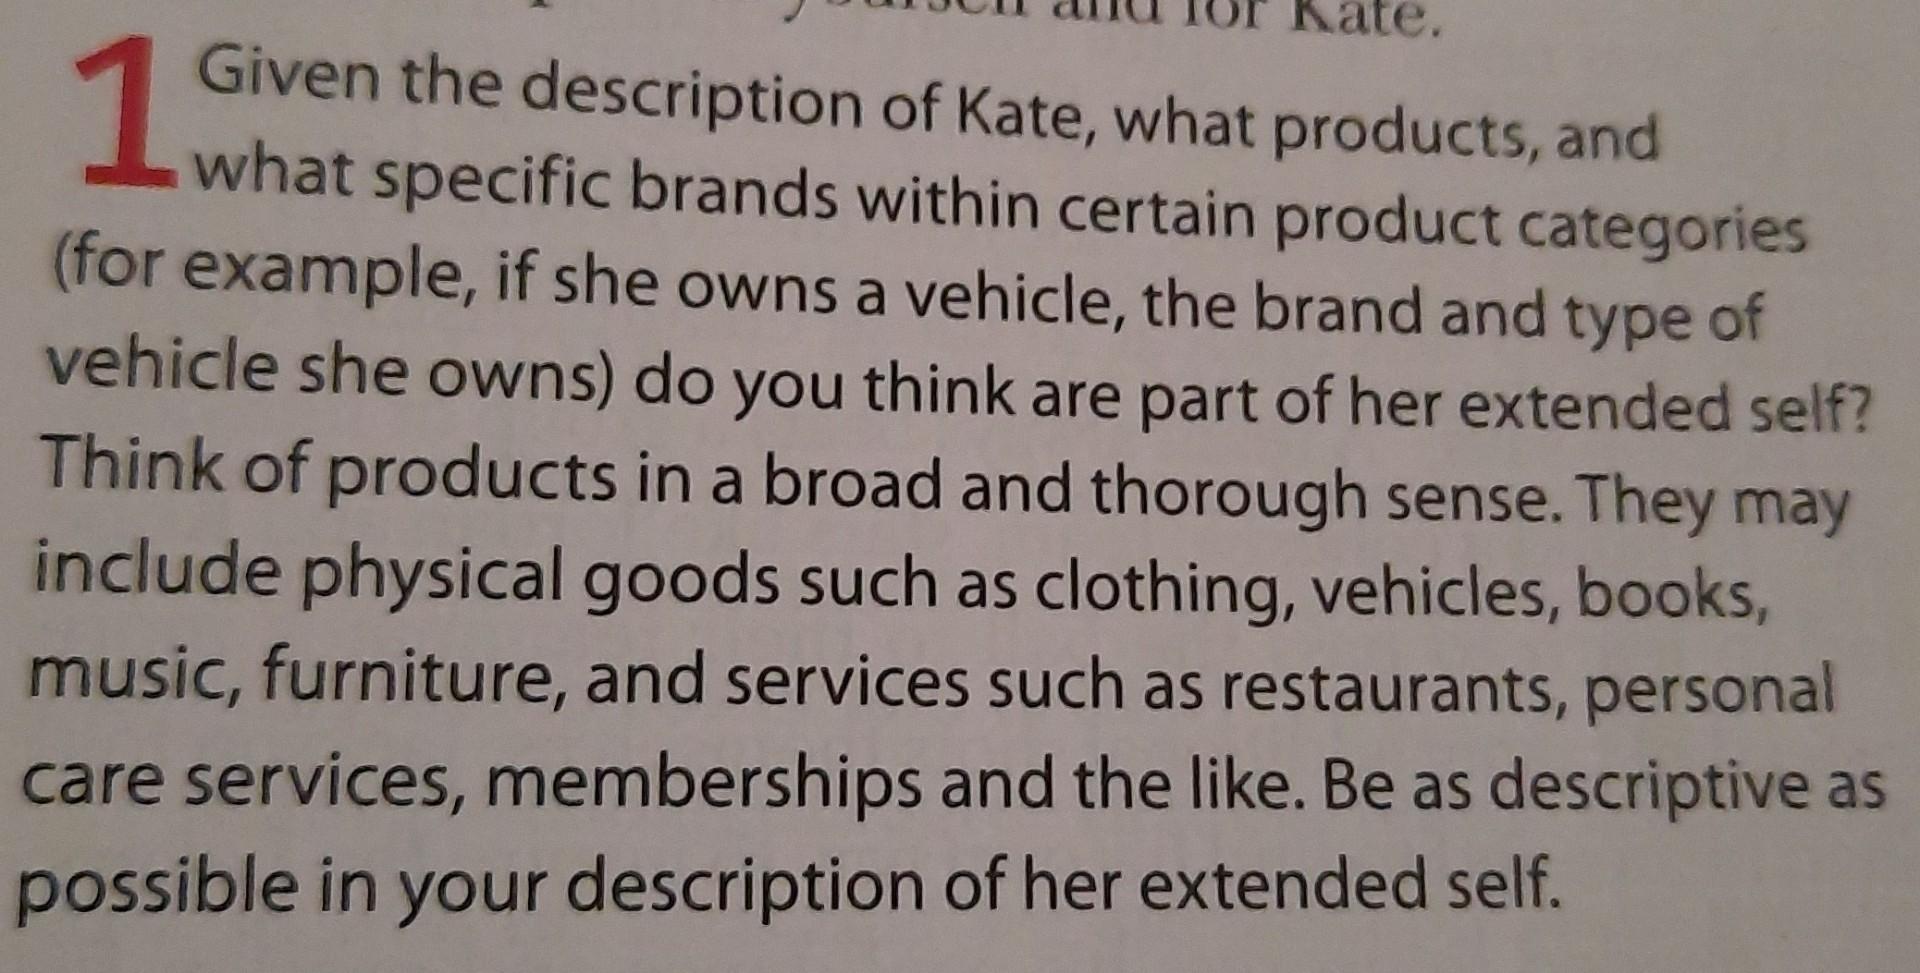 KATE, PRODUCTS